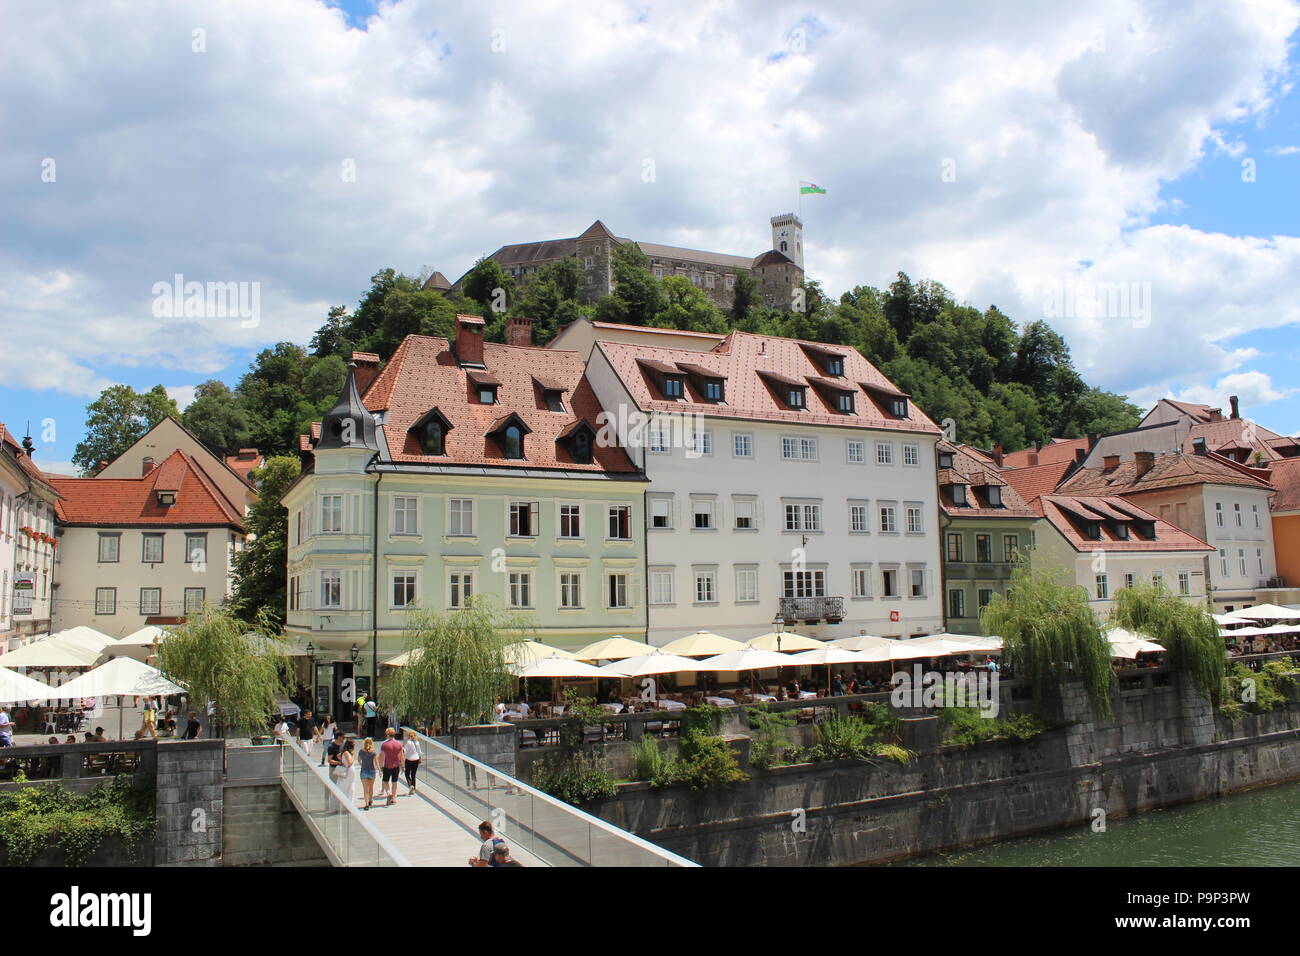 A charming scene from the center of Ljubljana, the Ljubljana castle is on the top. Stock Photo